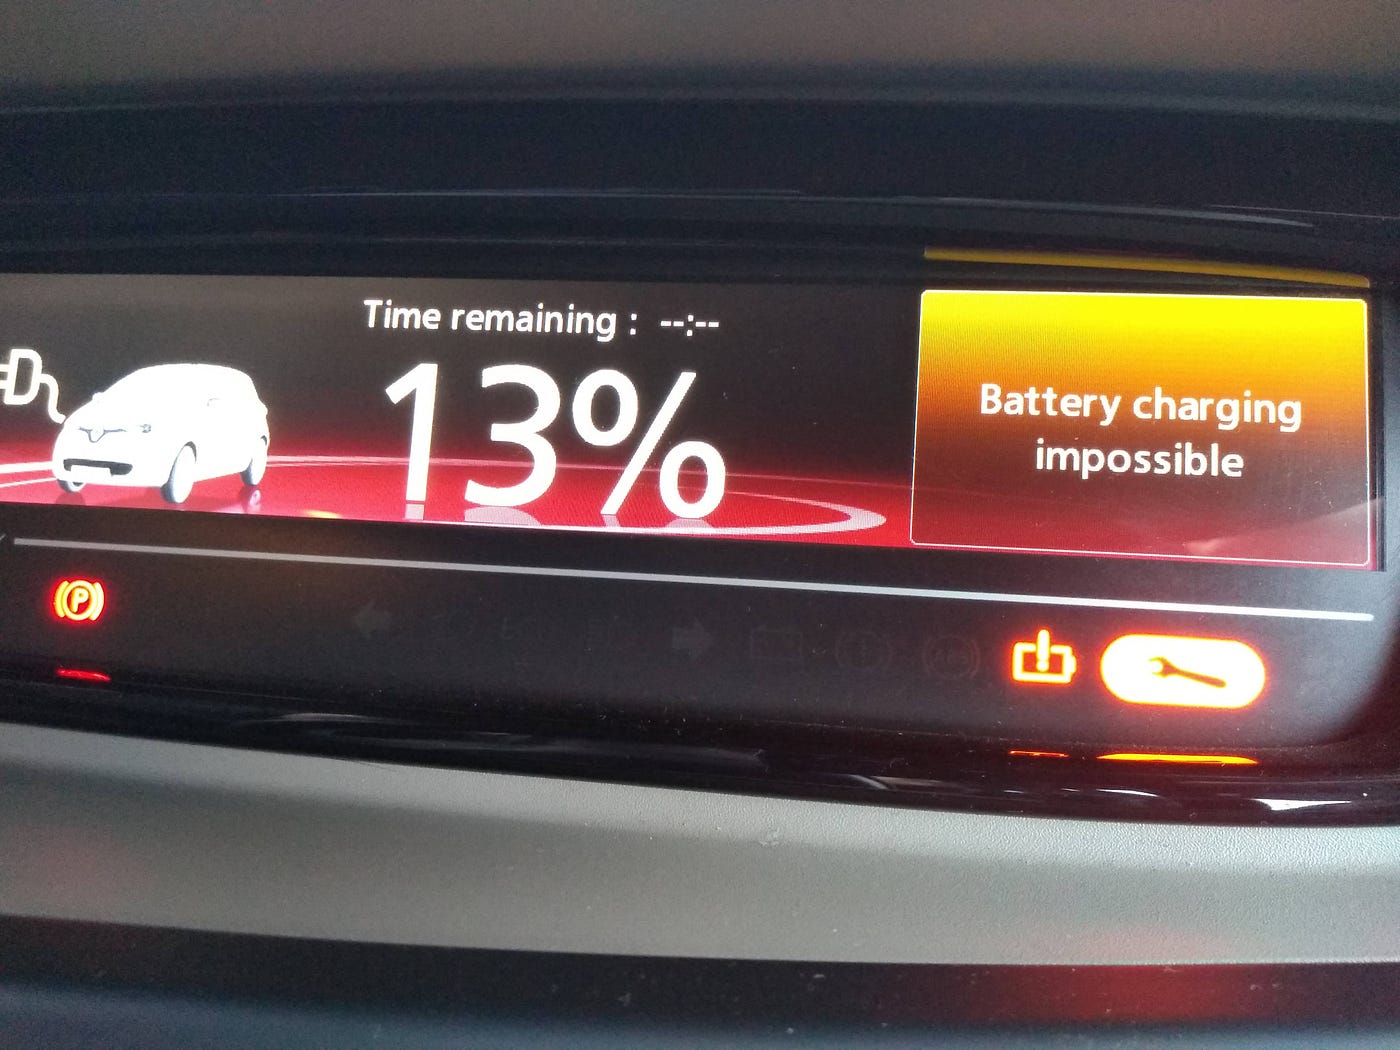 Renault Zoe Battery Charging Impossible Issue | by Ryan Walmsley | Medium